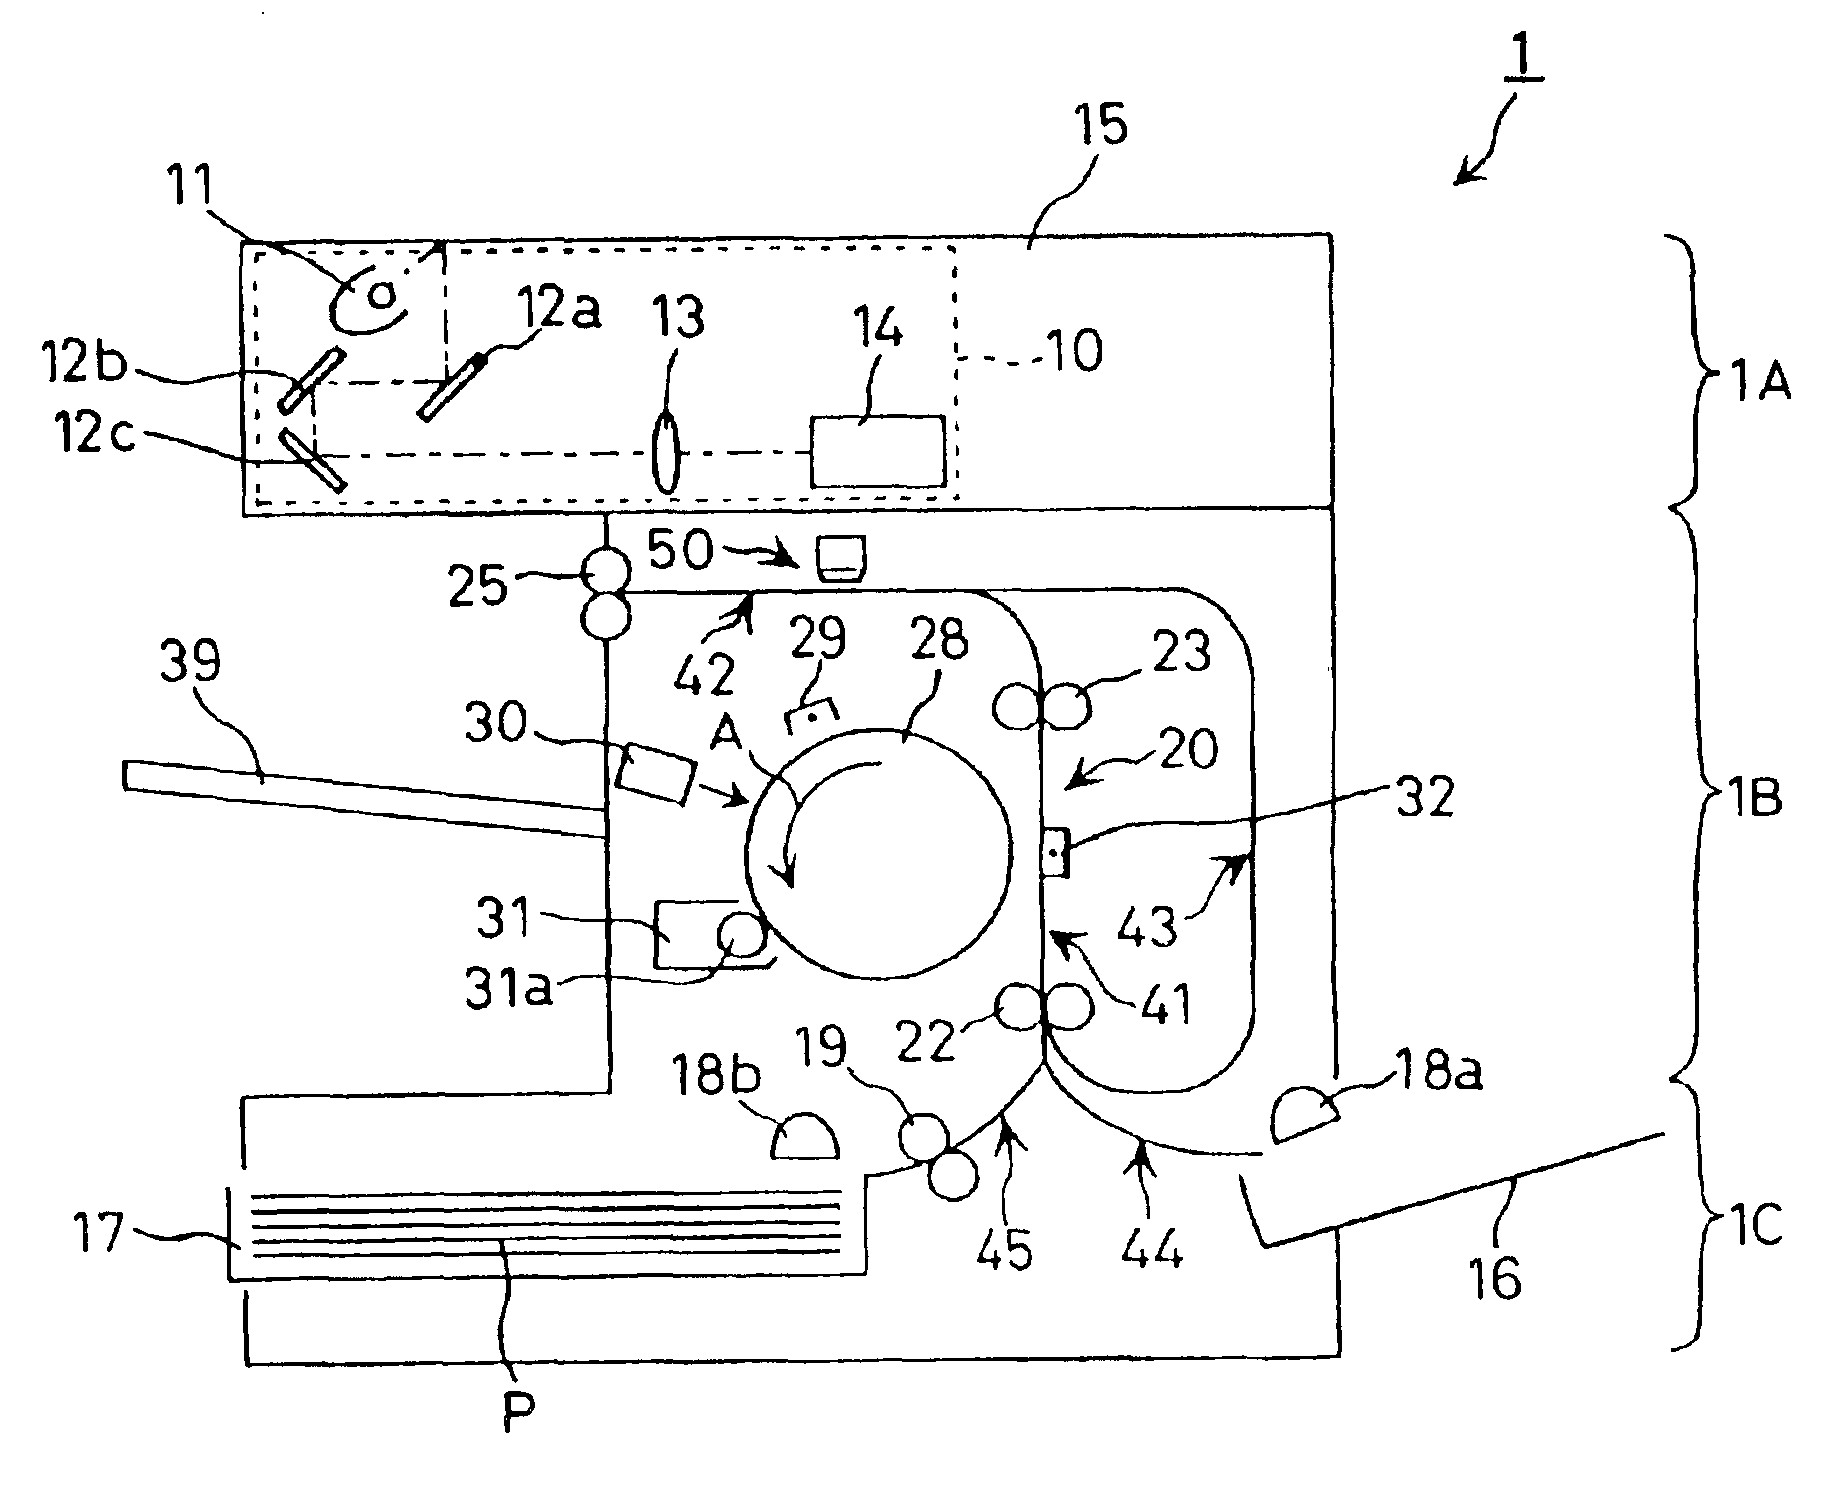 Image forming apparatus for monochromatic and color image formation